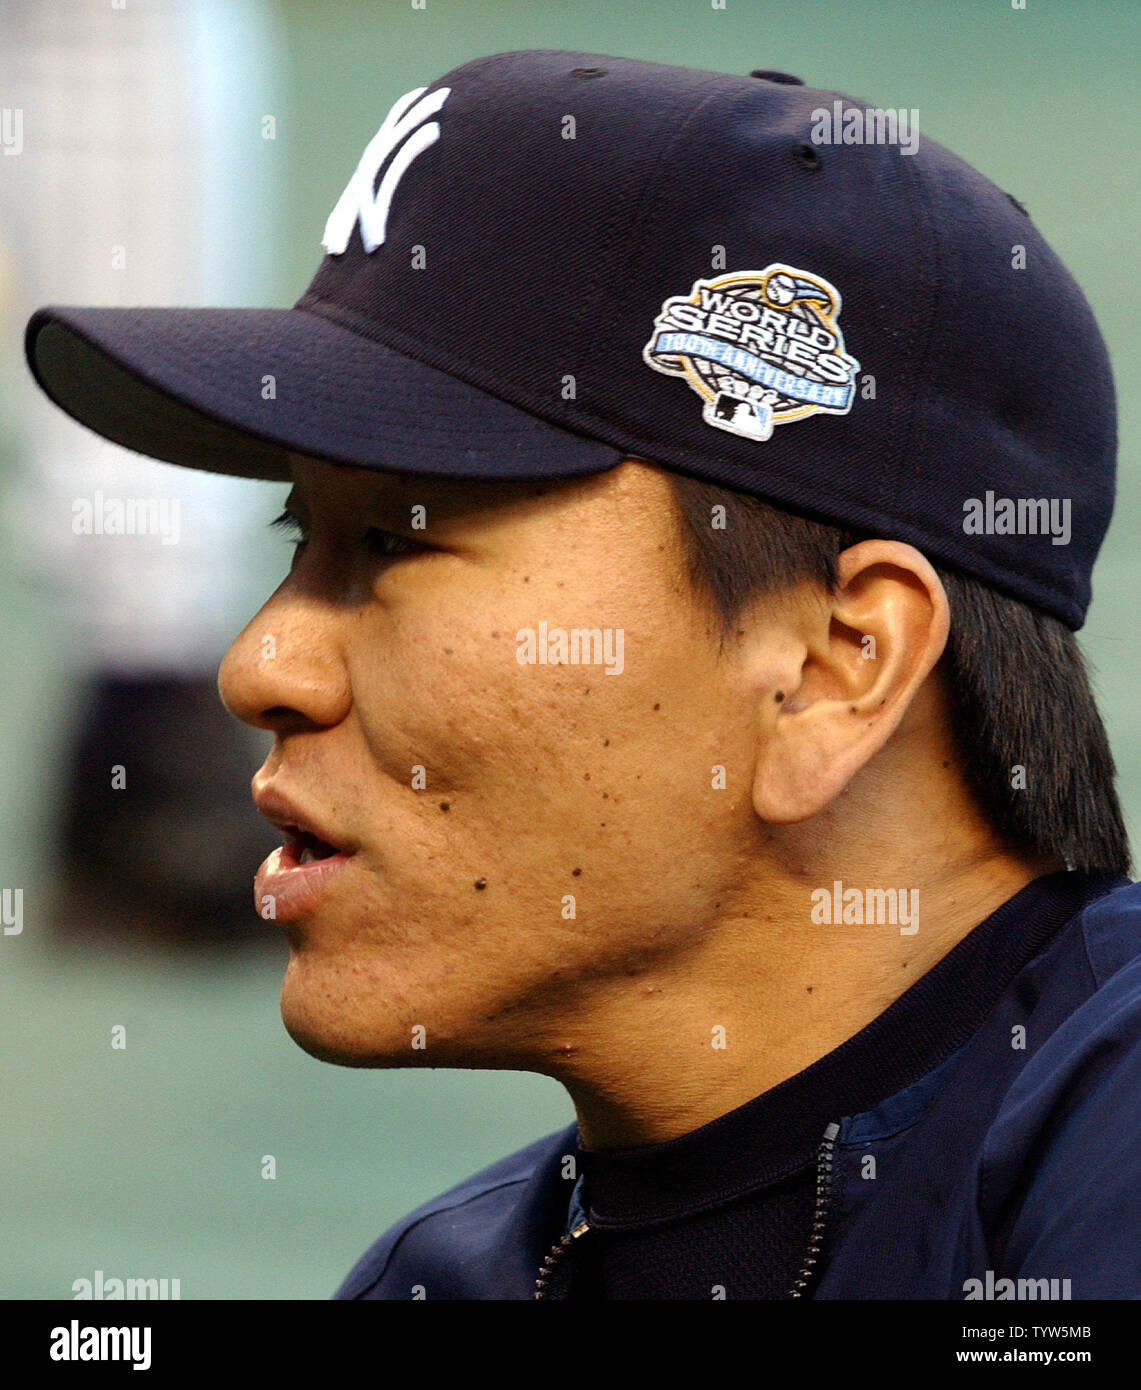 The New York Yankees' Hideki Matsui sports a World Series hat before Game 2 of the World Series against the Florida Marlins on October 19, 2003, at Yankee Stadium. The Marlins defeated the Yankees 3-2 in Game 1.    (UPI/Roger L. Wollenberg) Stock Photo